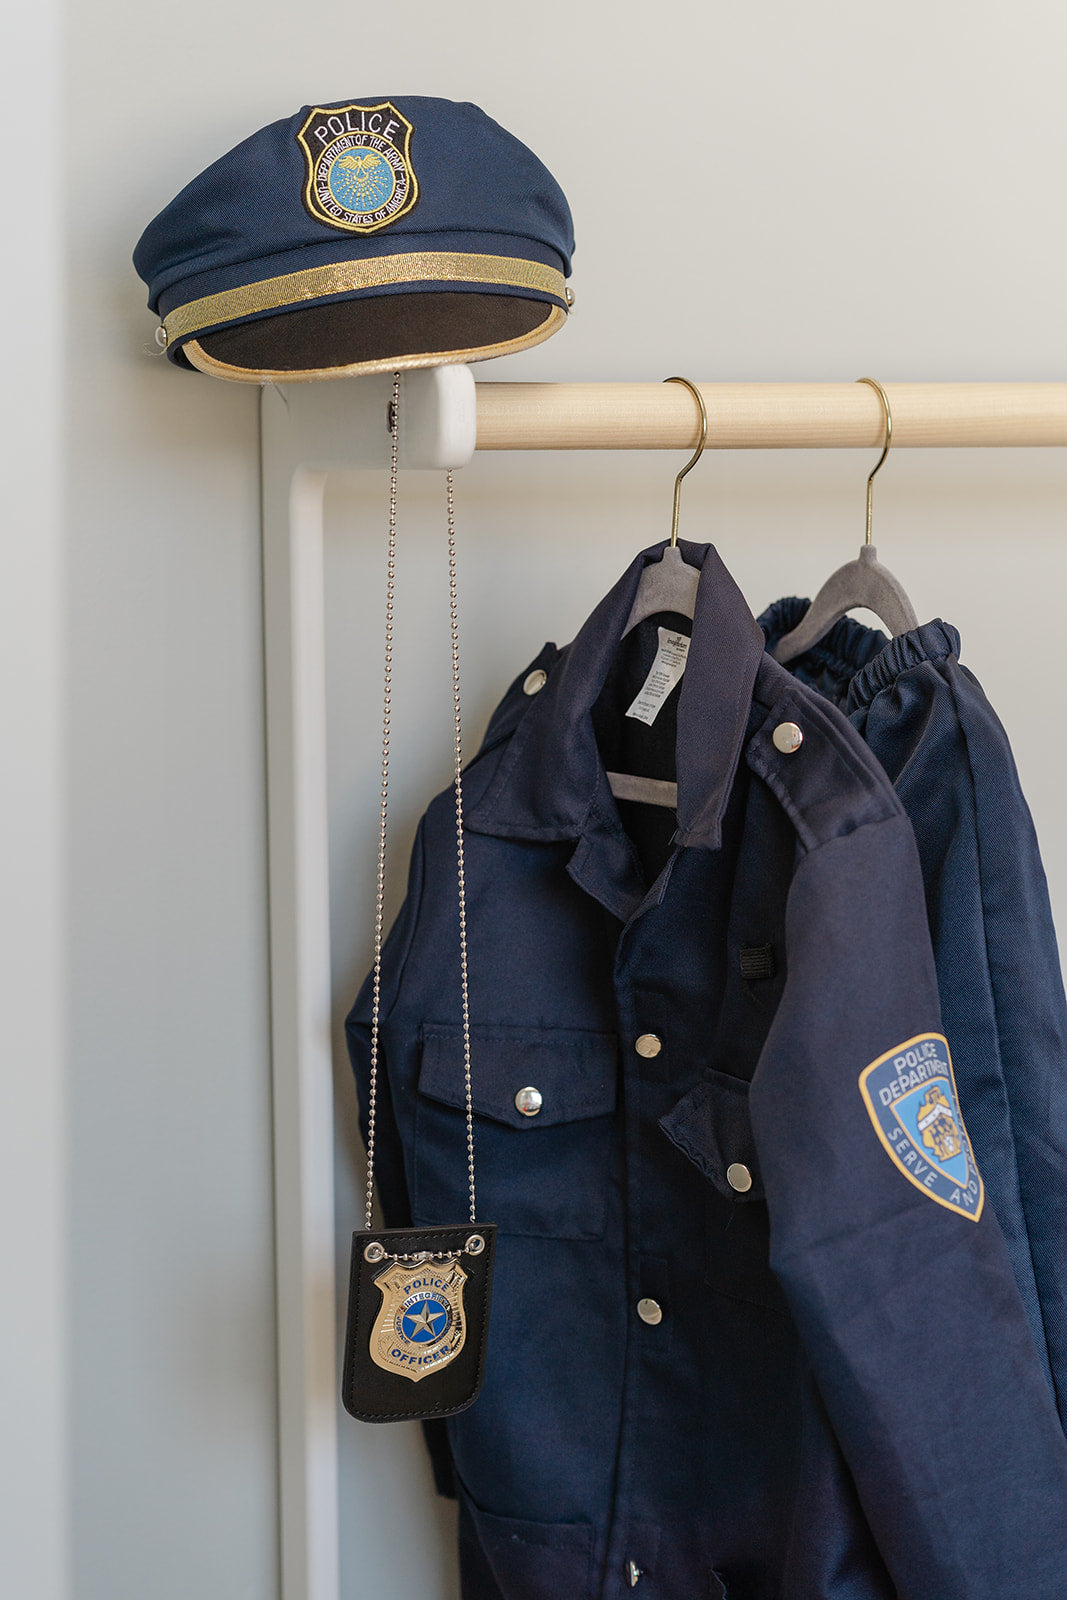 A costume rack with police dress up costumes for boys